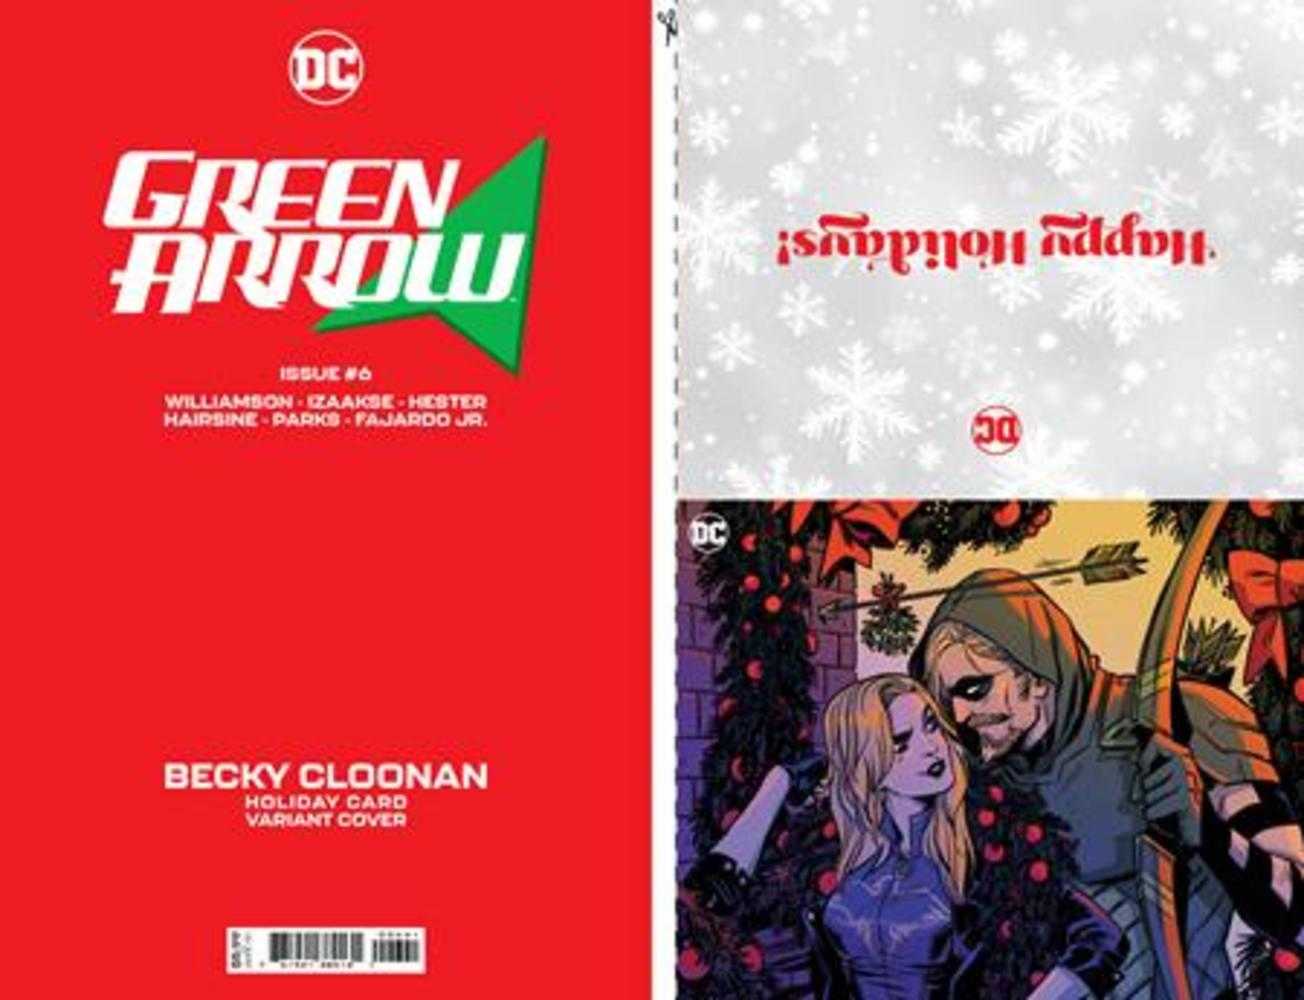 Green Arrow #6 (Of 12) Cover C Becky Cloonan DC Holiday Card Special Edition Variant